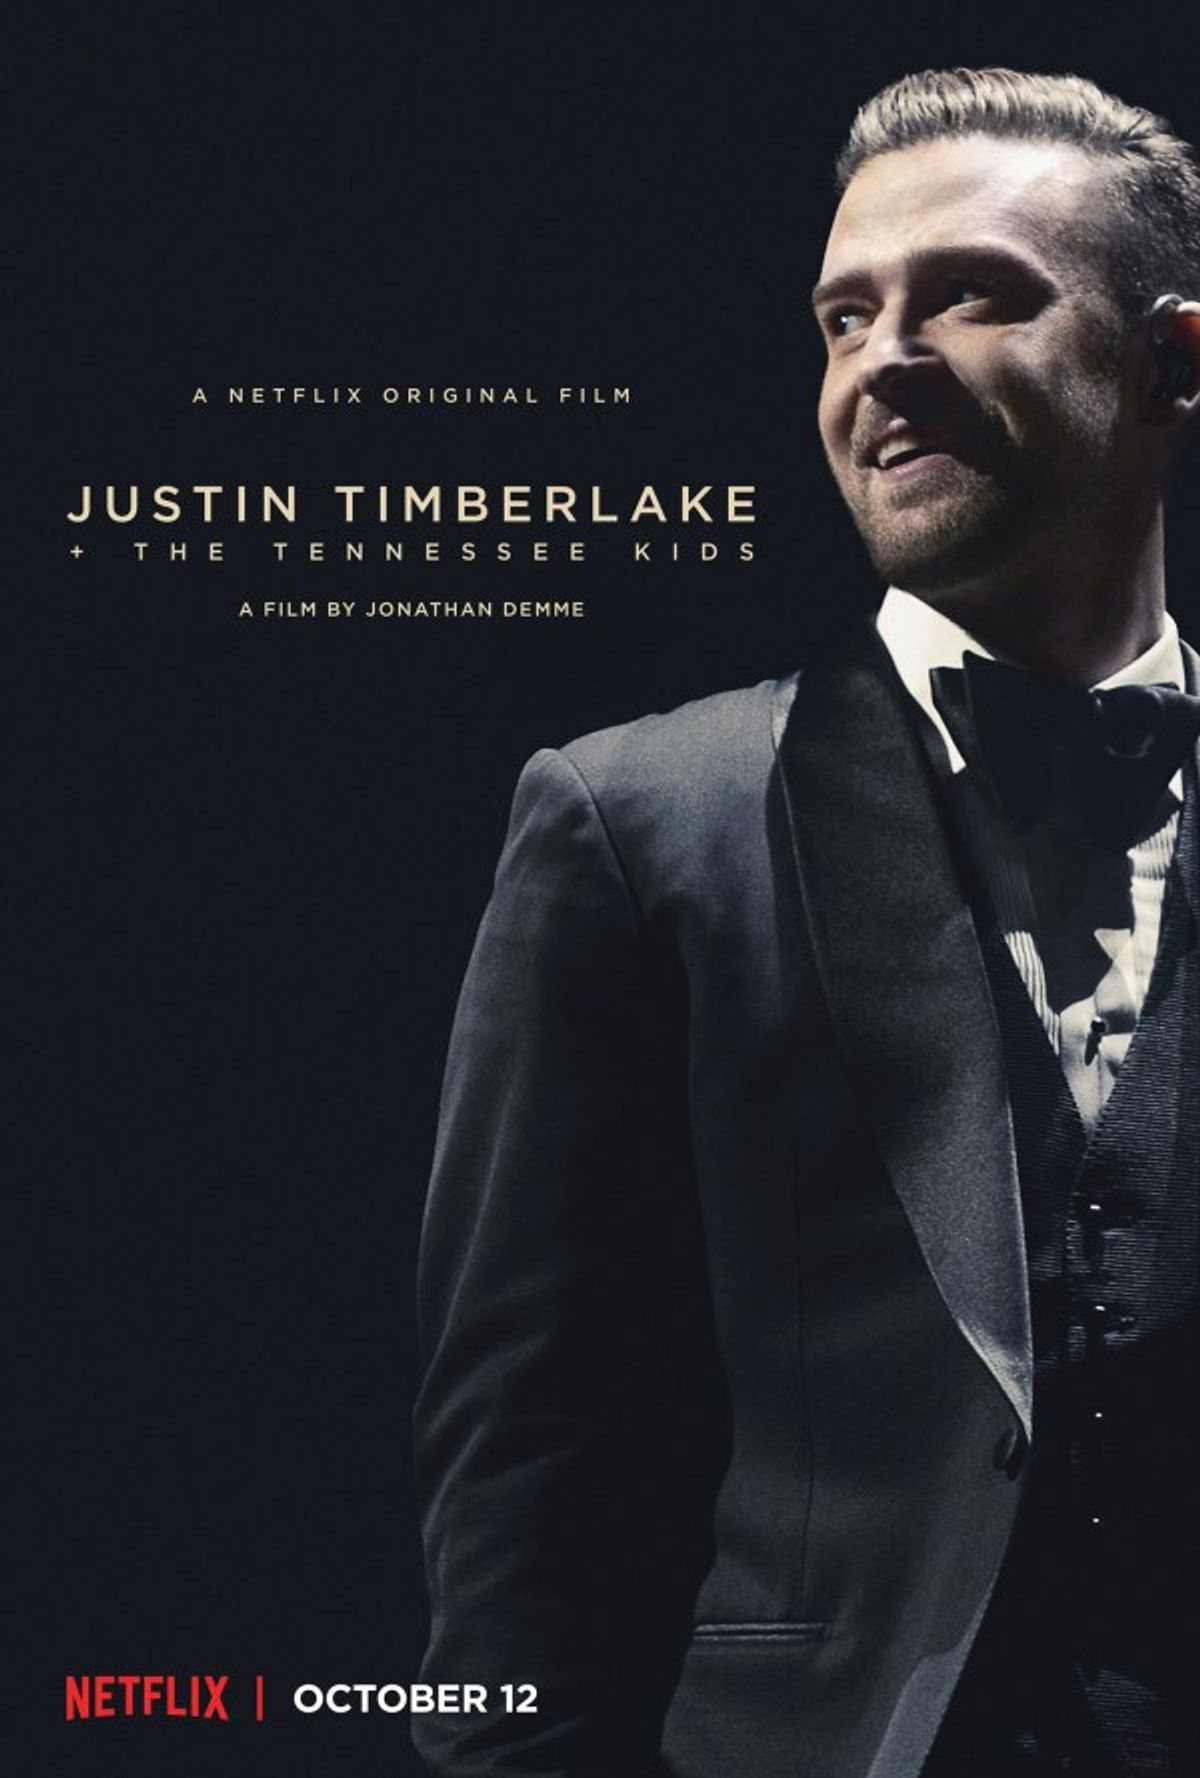 Justin Timberlake & The Tennessee Kids: A Review